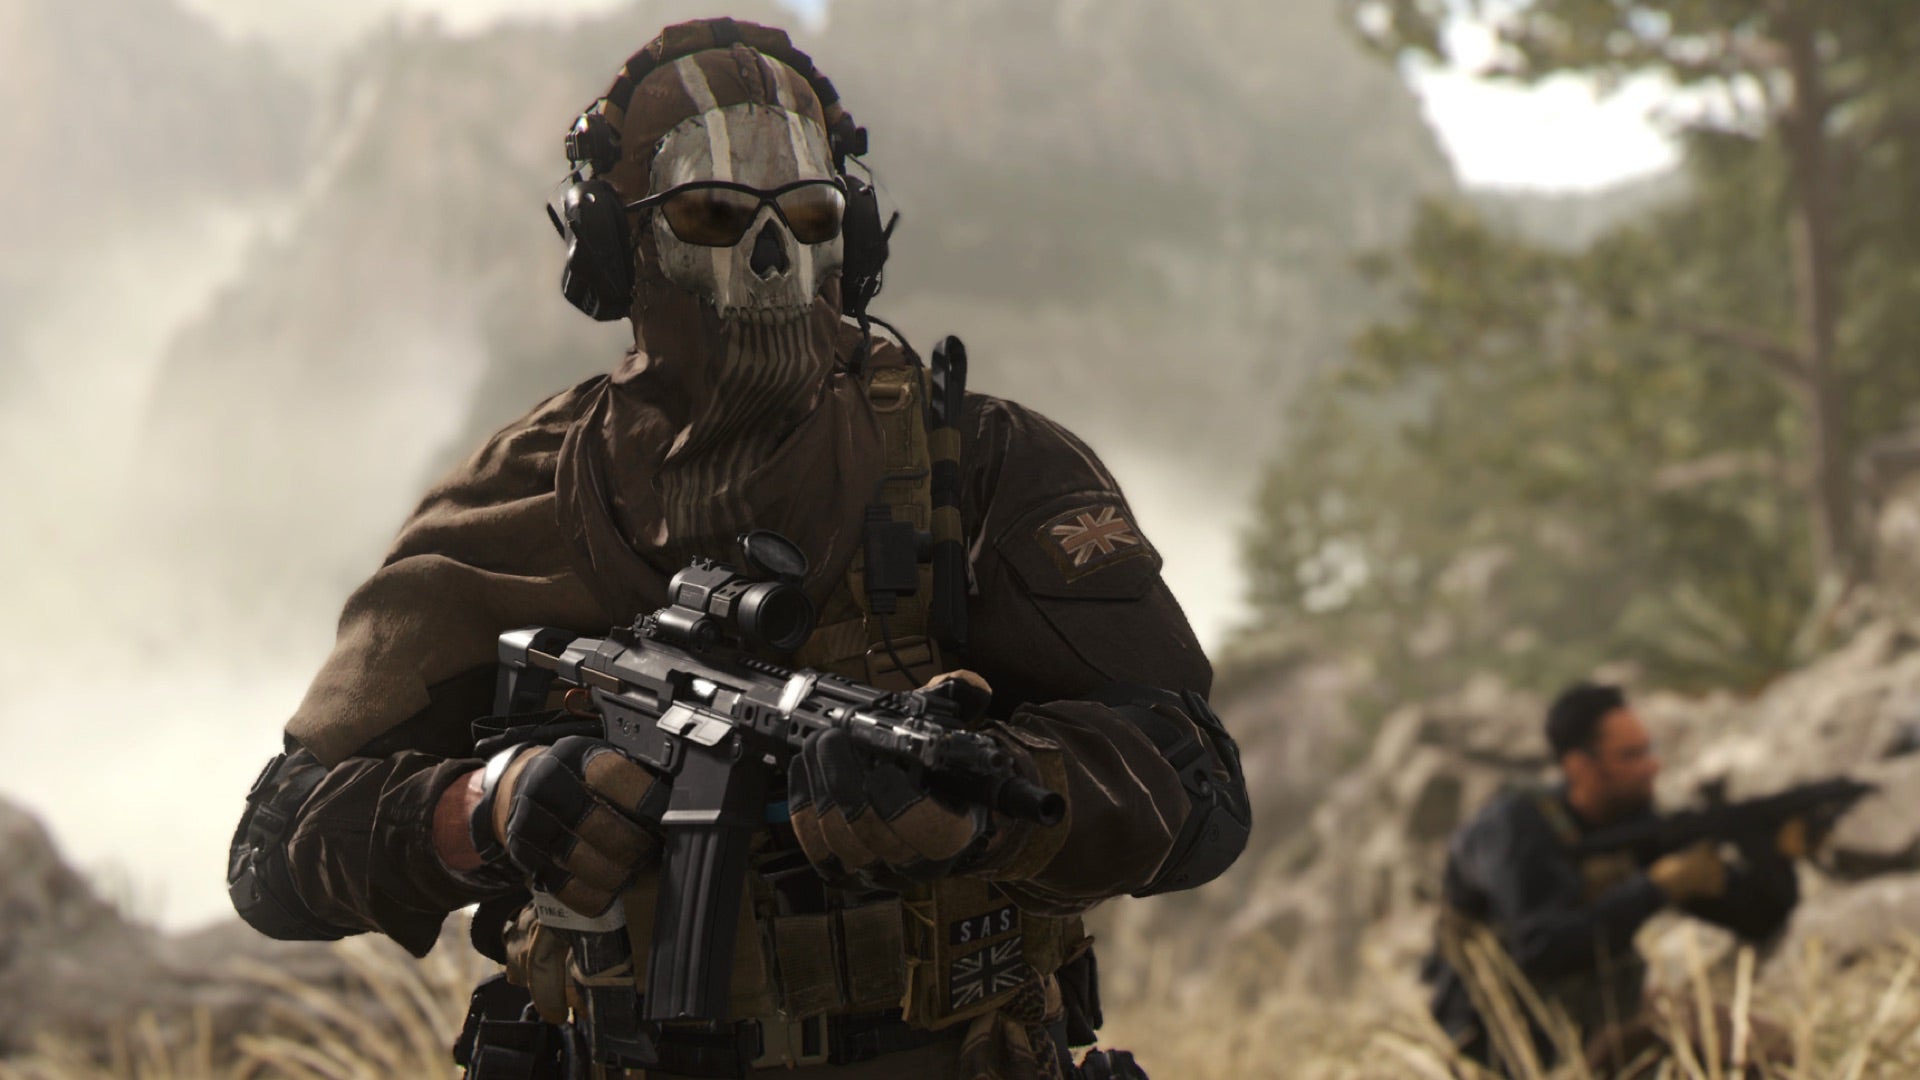 Image for PlayStation boss calls Microsoft's post-acquisition Call of Duty offer "inadequate on many levels"